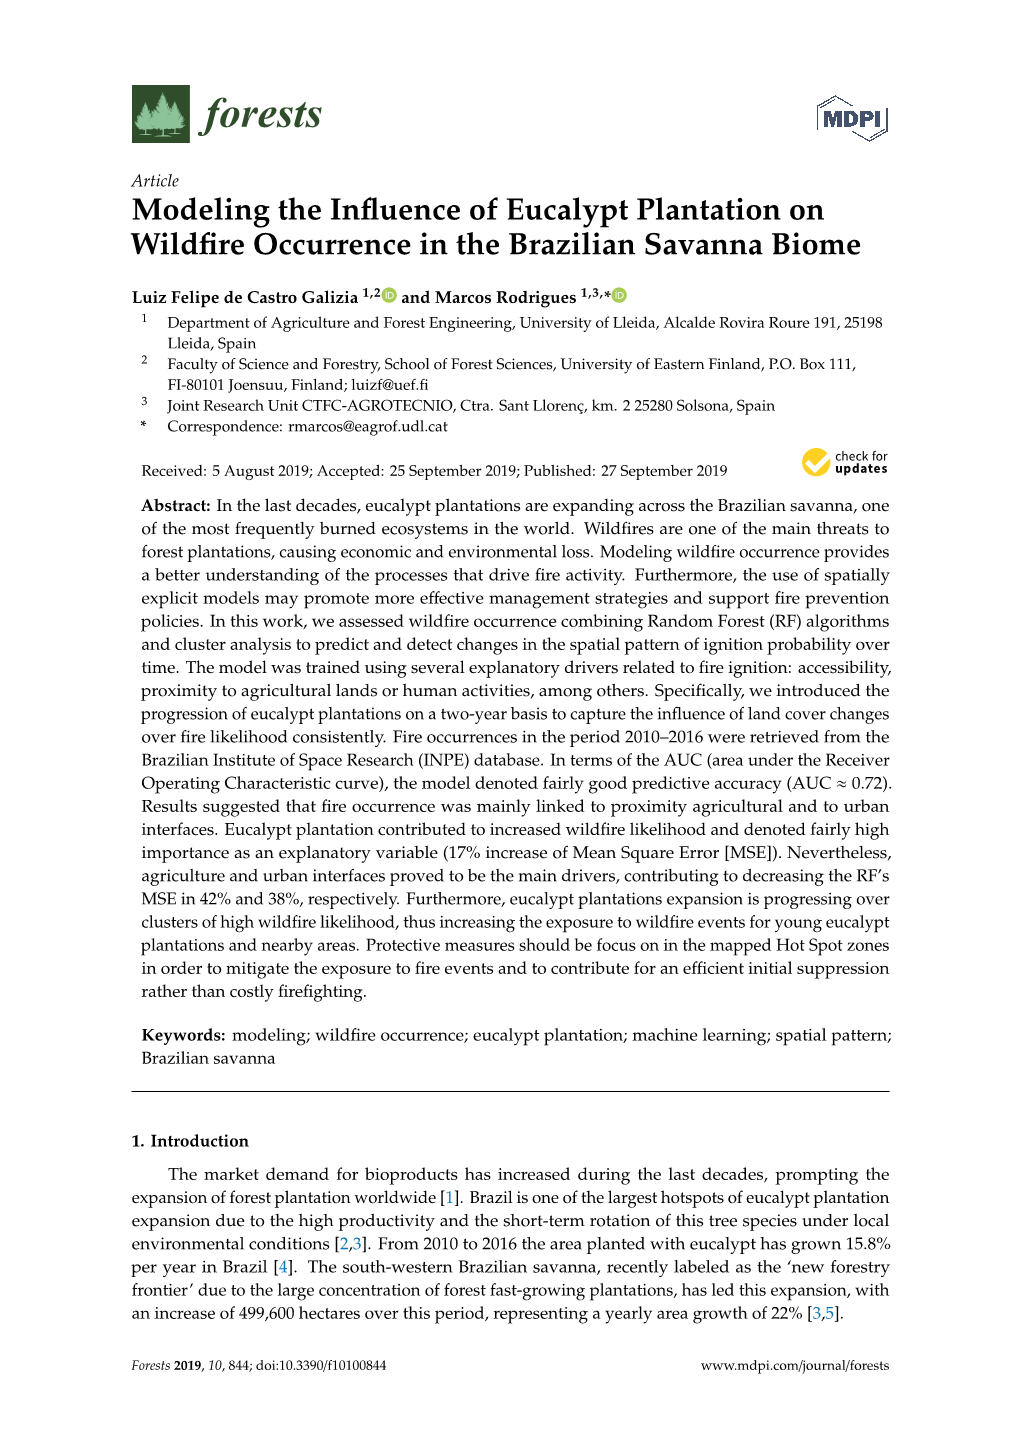 Modeling the Influence of Eucalypt Plantation on Wildfire Occurrence In